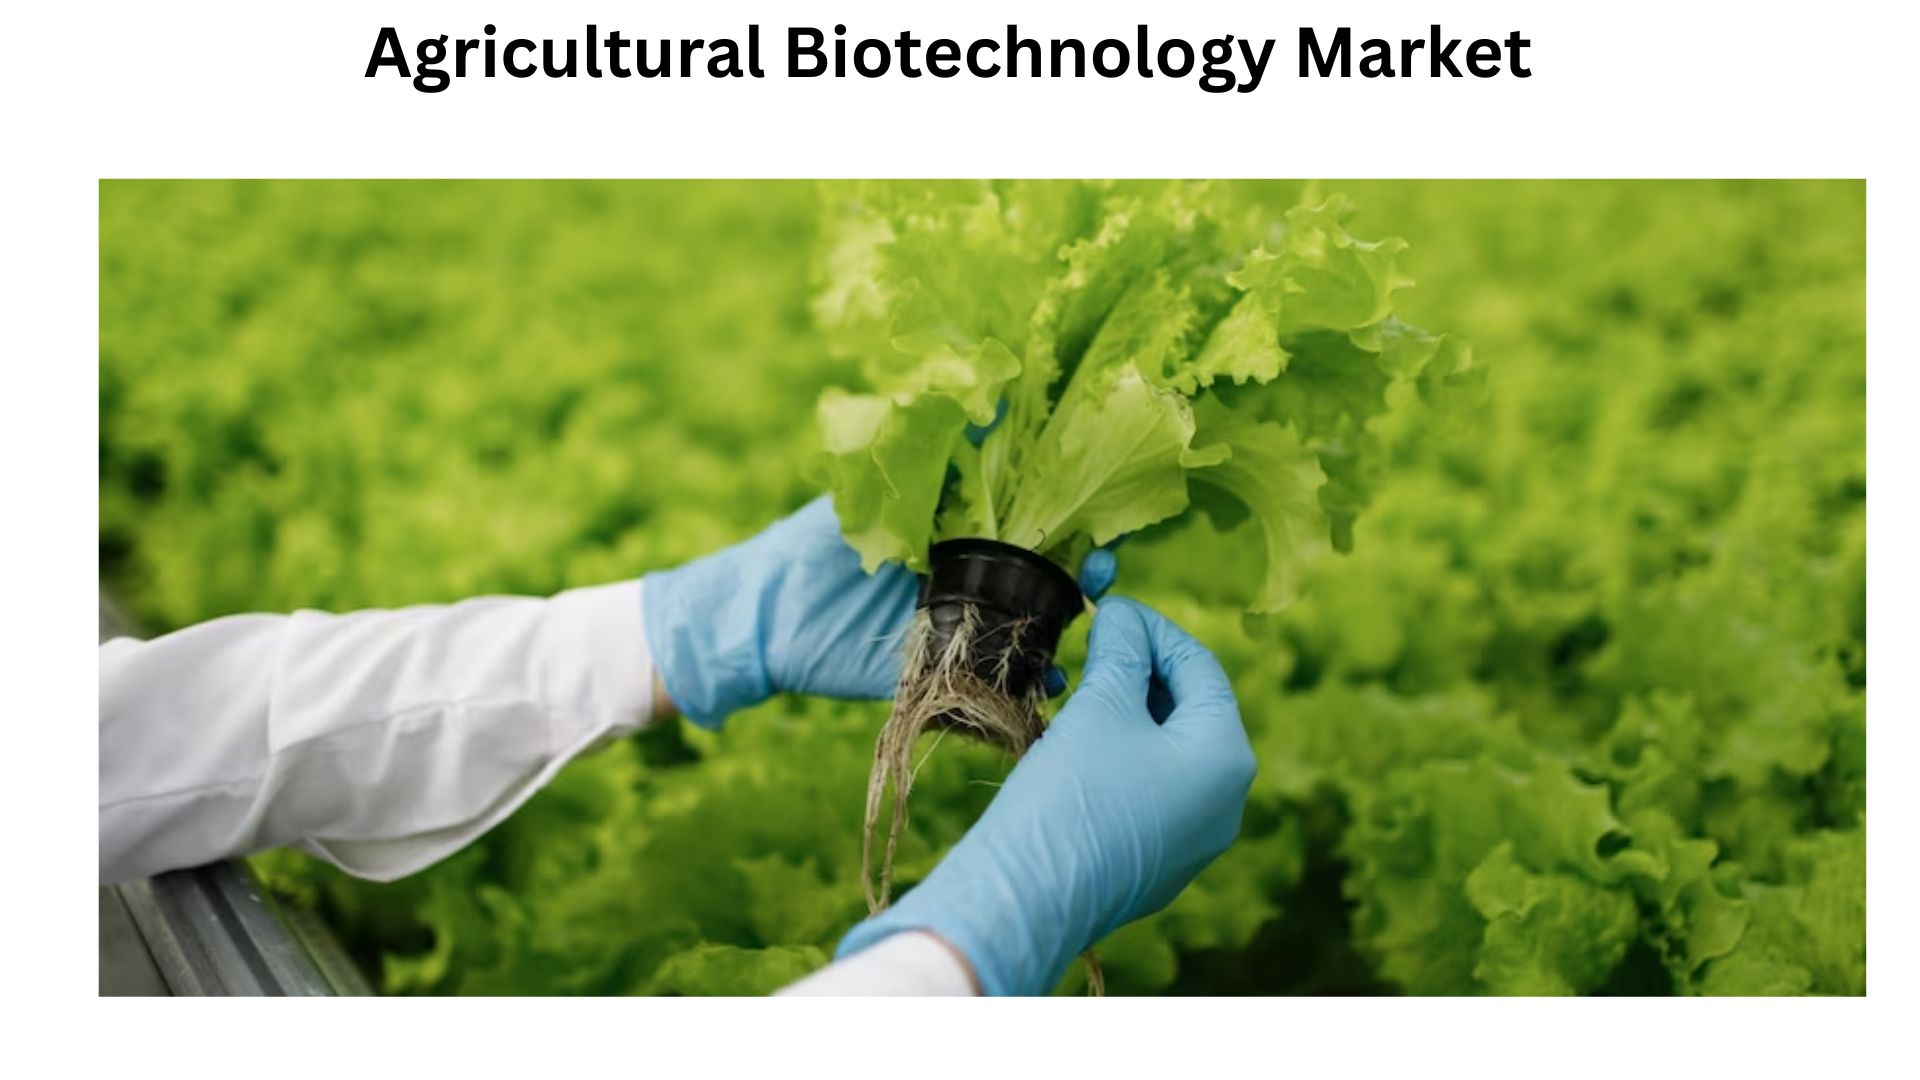 Agricultural Biotechnology Market Size Projected To Reach USD 232 Billion By 2032